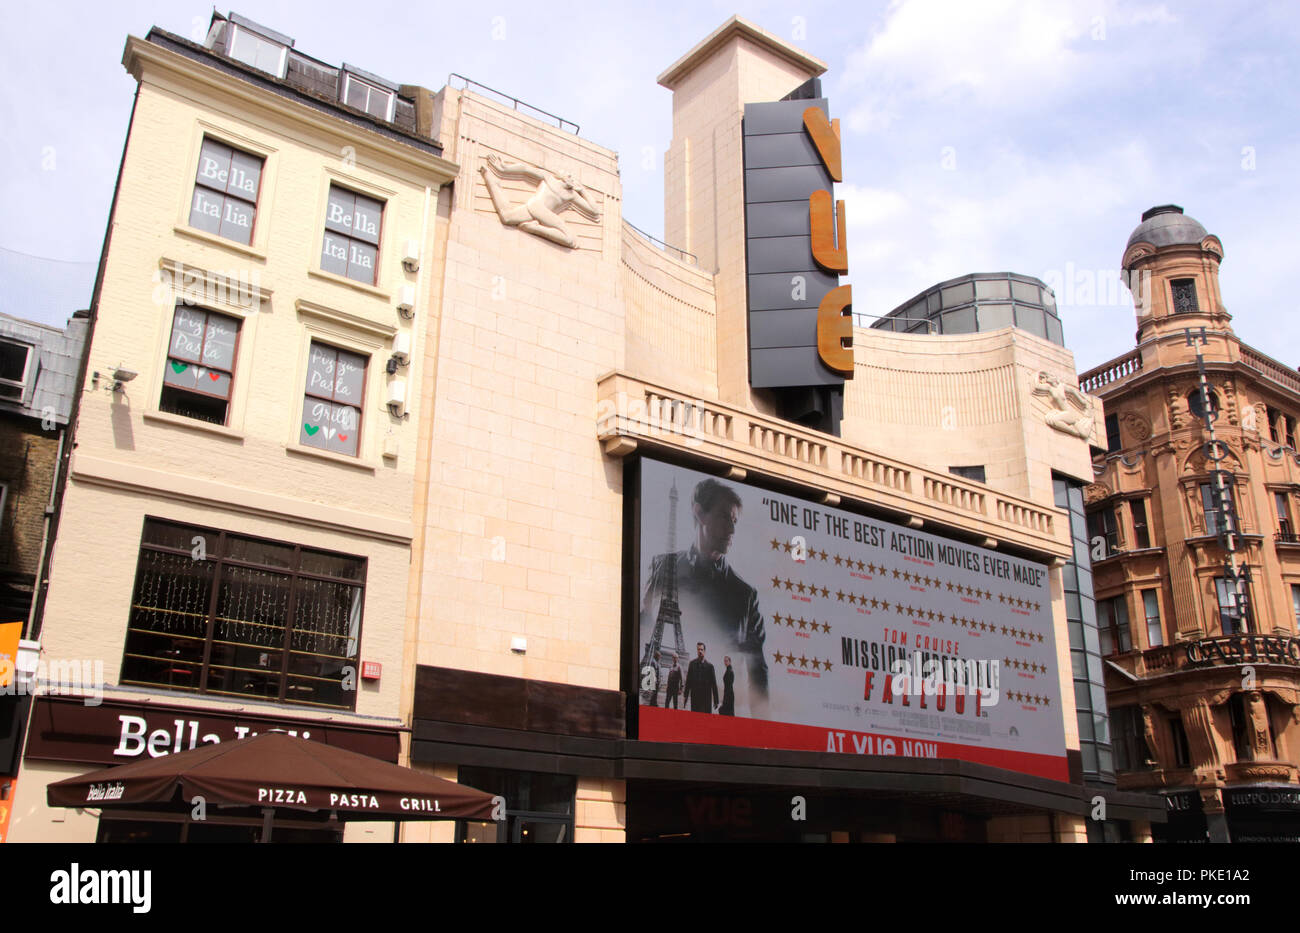 Vue Cinema am Leicester Square London August 2018 Stockfoto